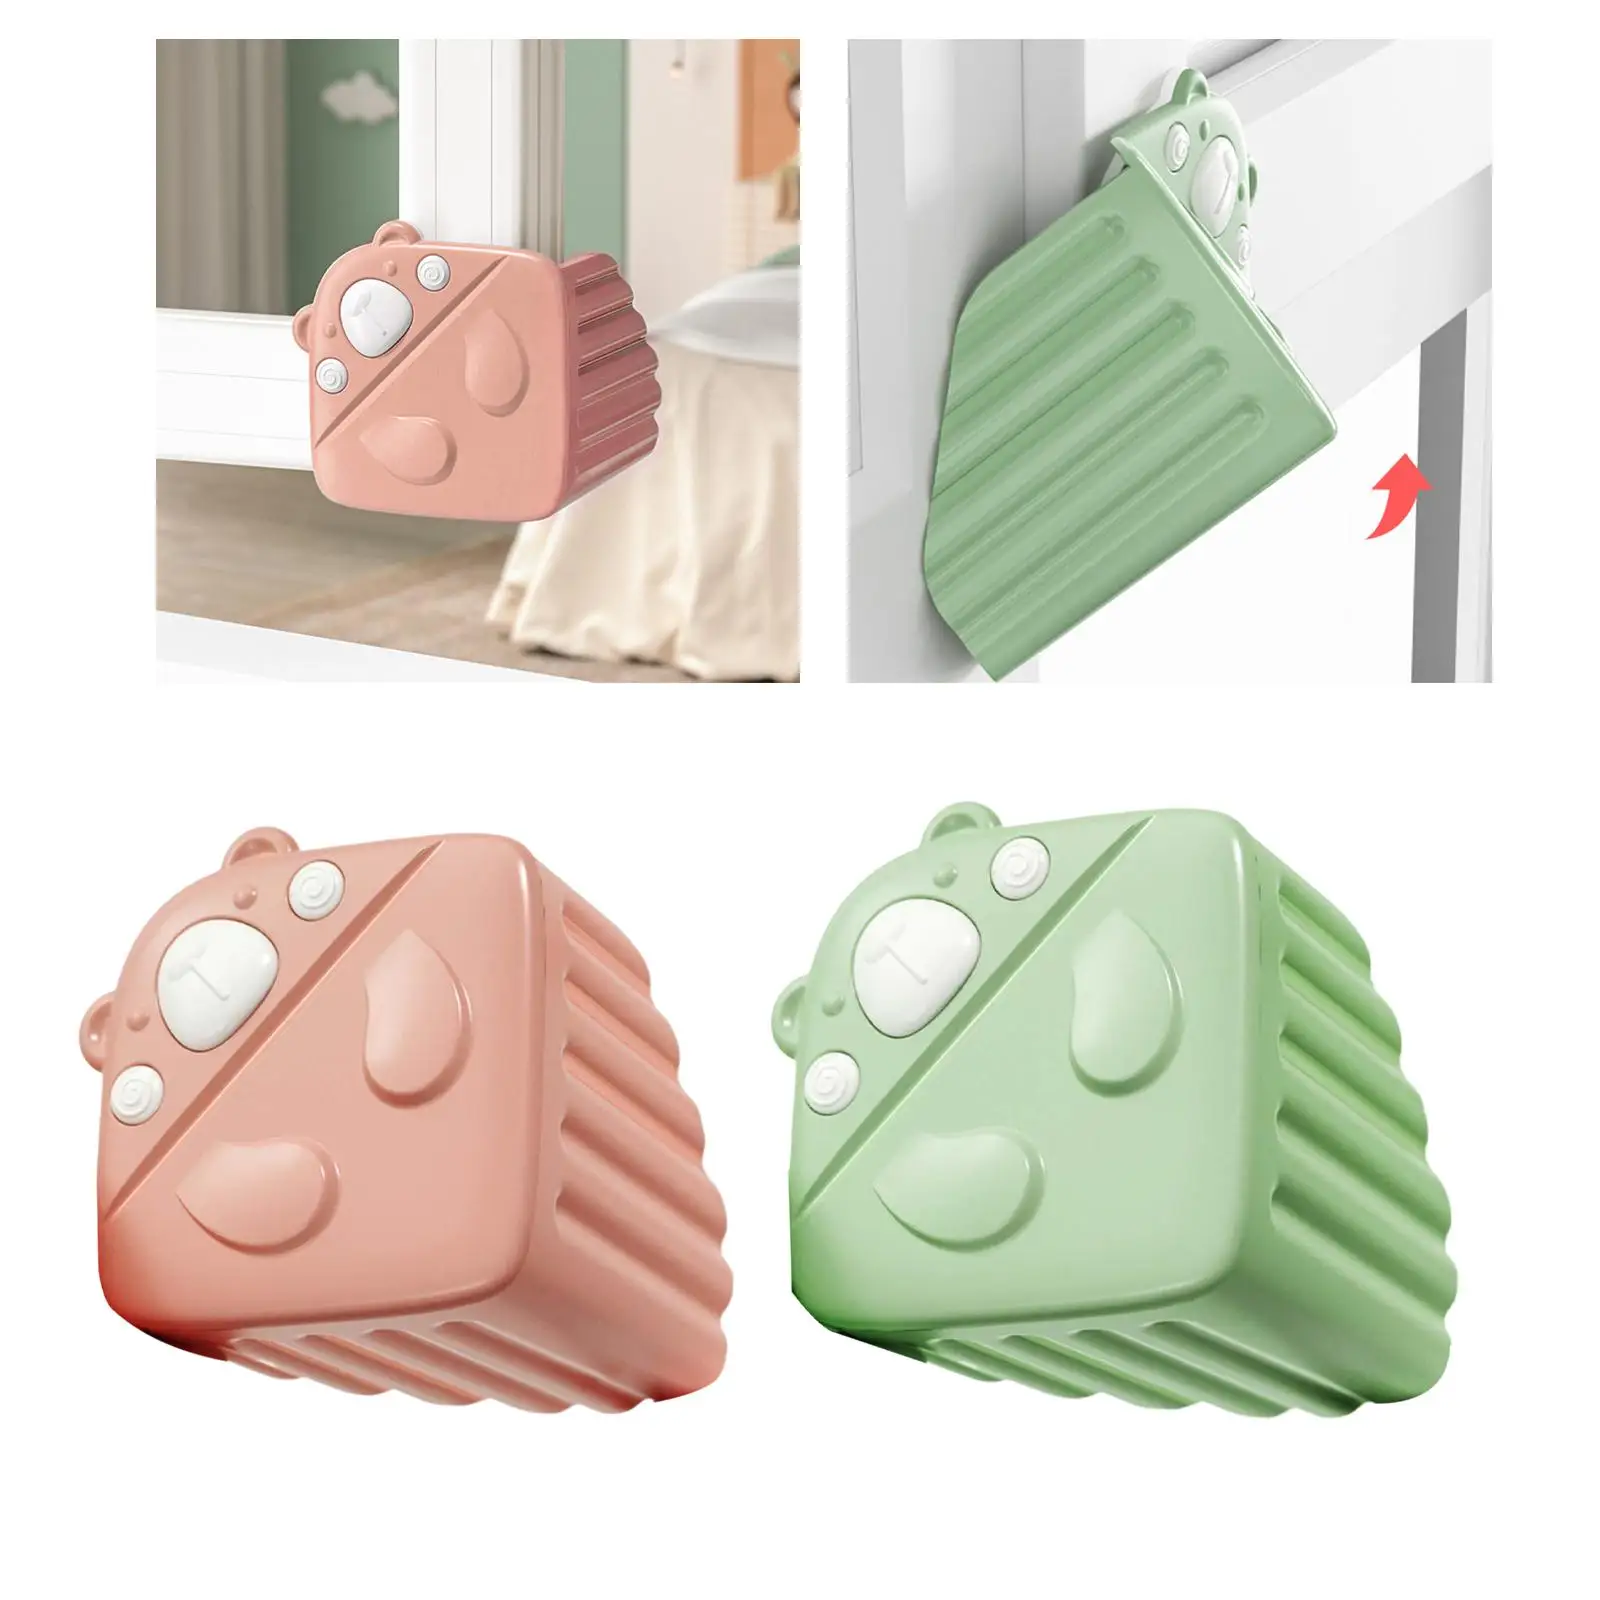 Window Guard Protectors Protection Edge Cover Corner Cushions Edge Guards Baby Safety Corner Protector for Kids Room Bedroom